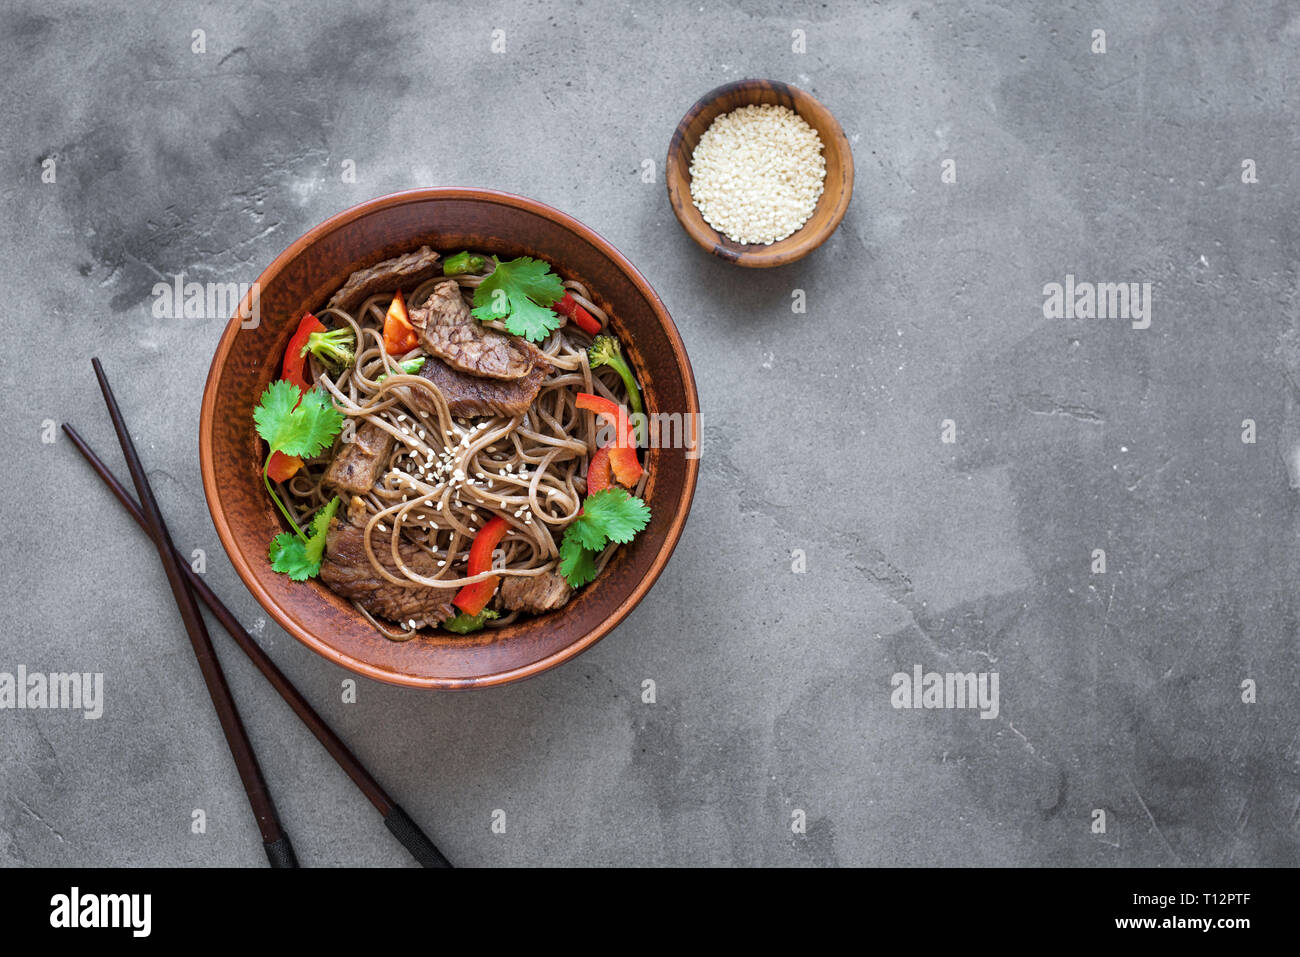 Stir fry with soba noodles, beef and vegetables. Asian healthy food, stir fried meal in bowl on dark background, top view, copy space. Stock Photo